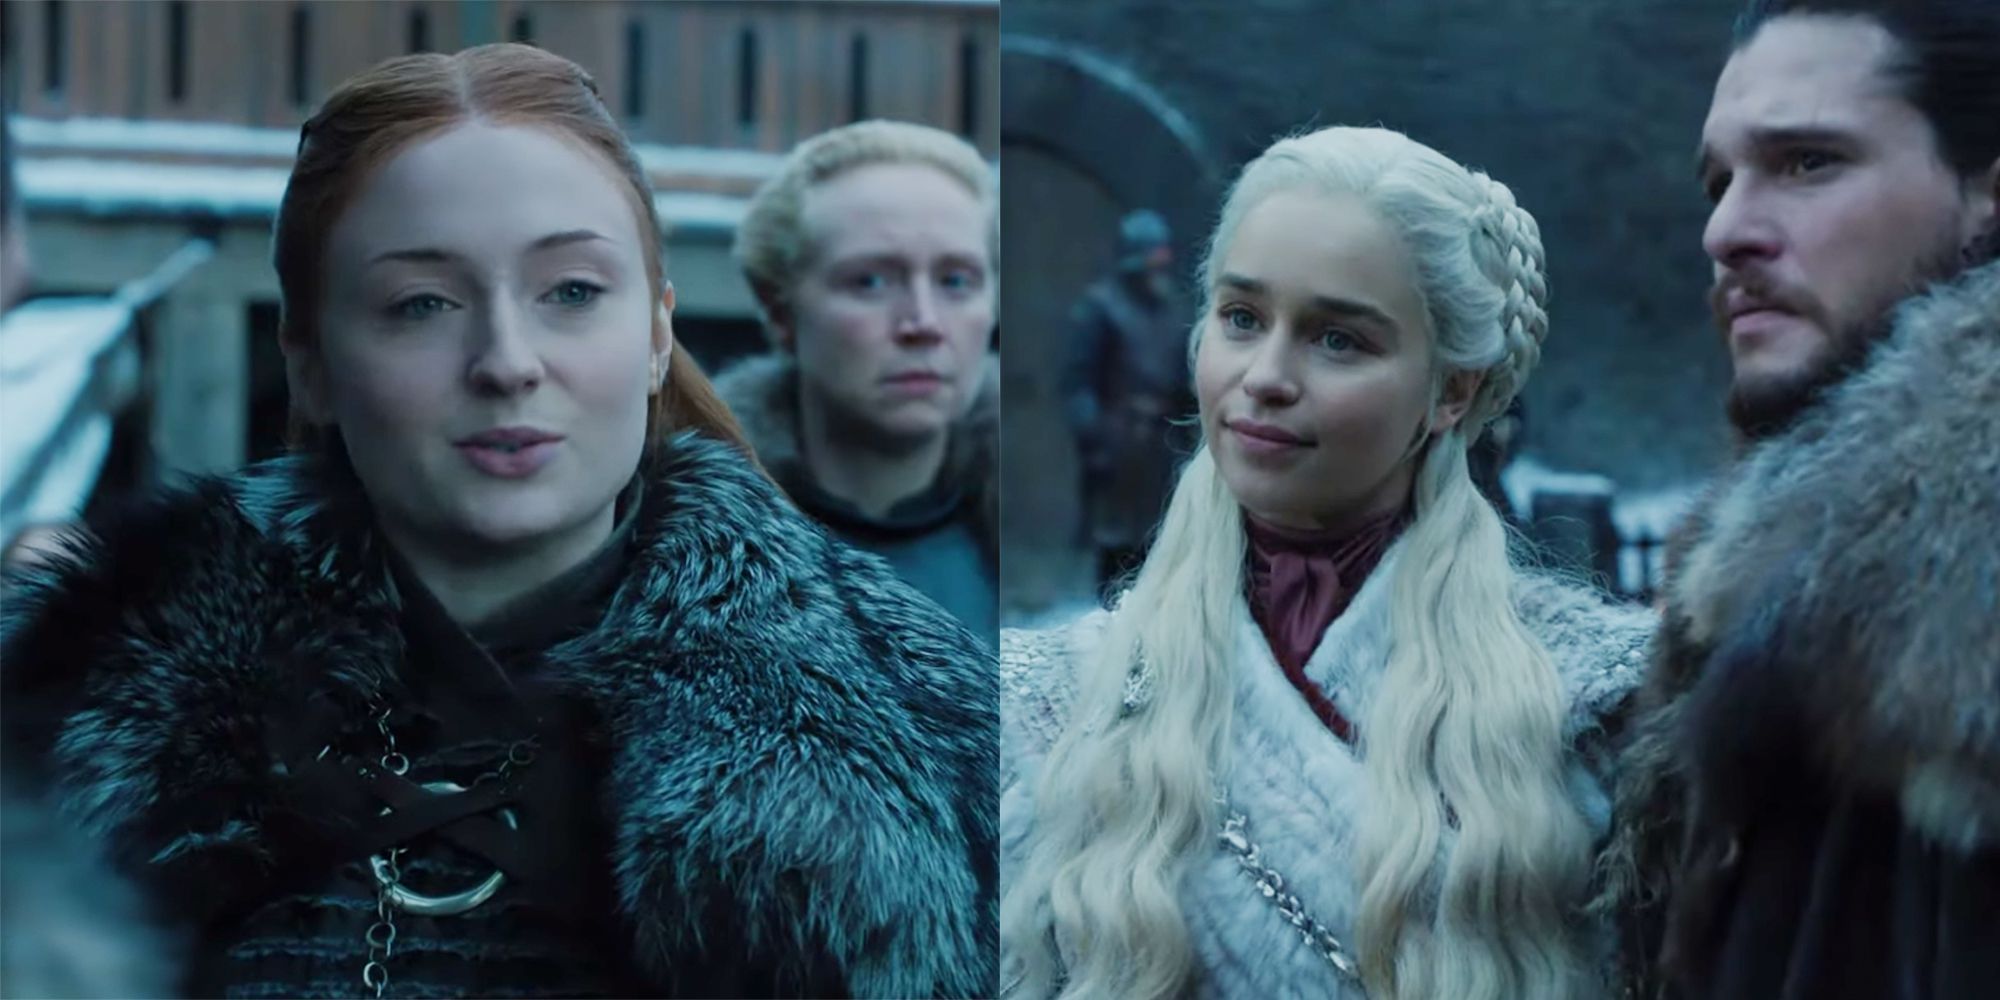 Game of Thrones Season 8 is Coming! Here’s Everything We Know So Far